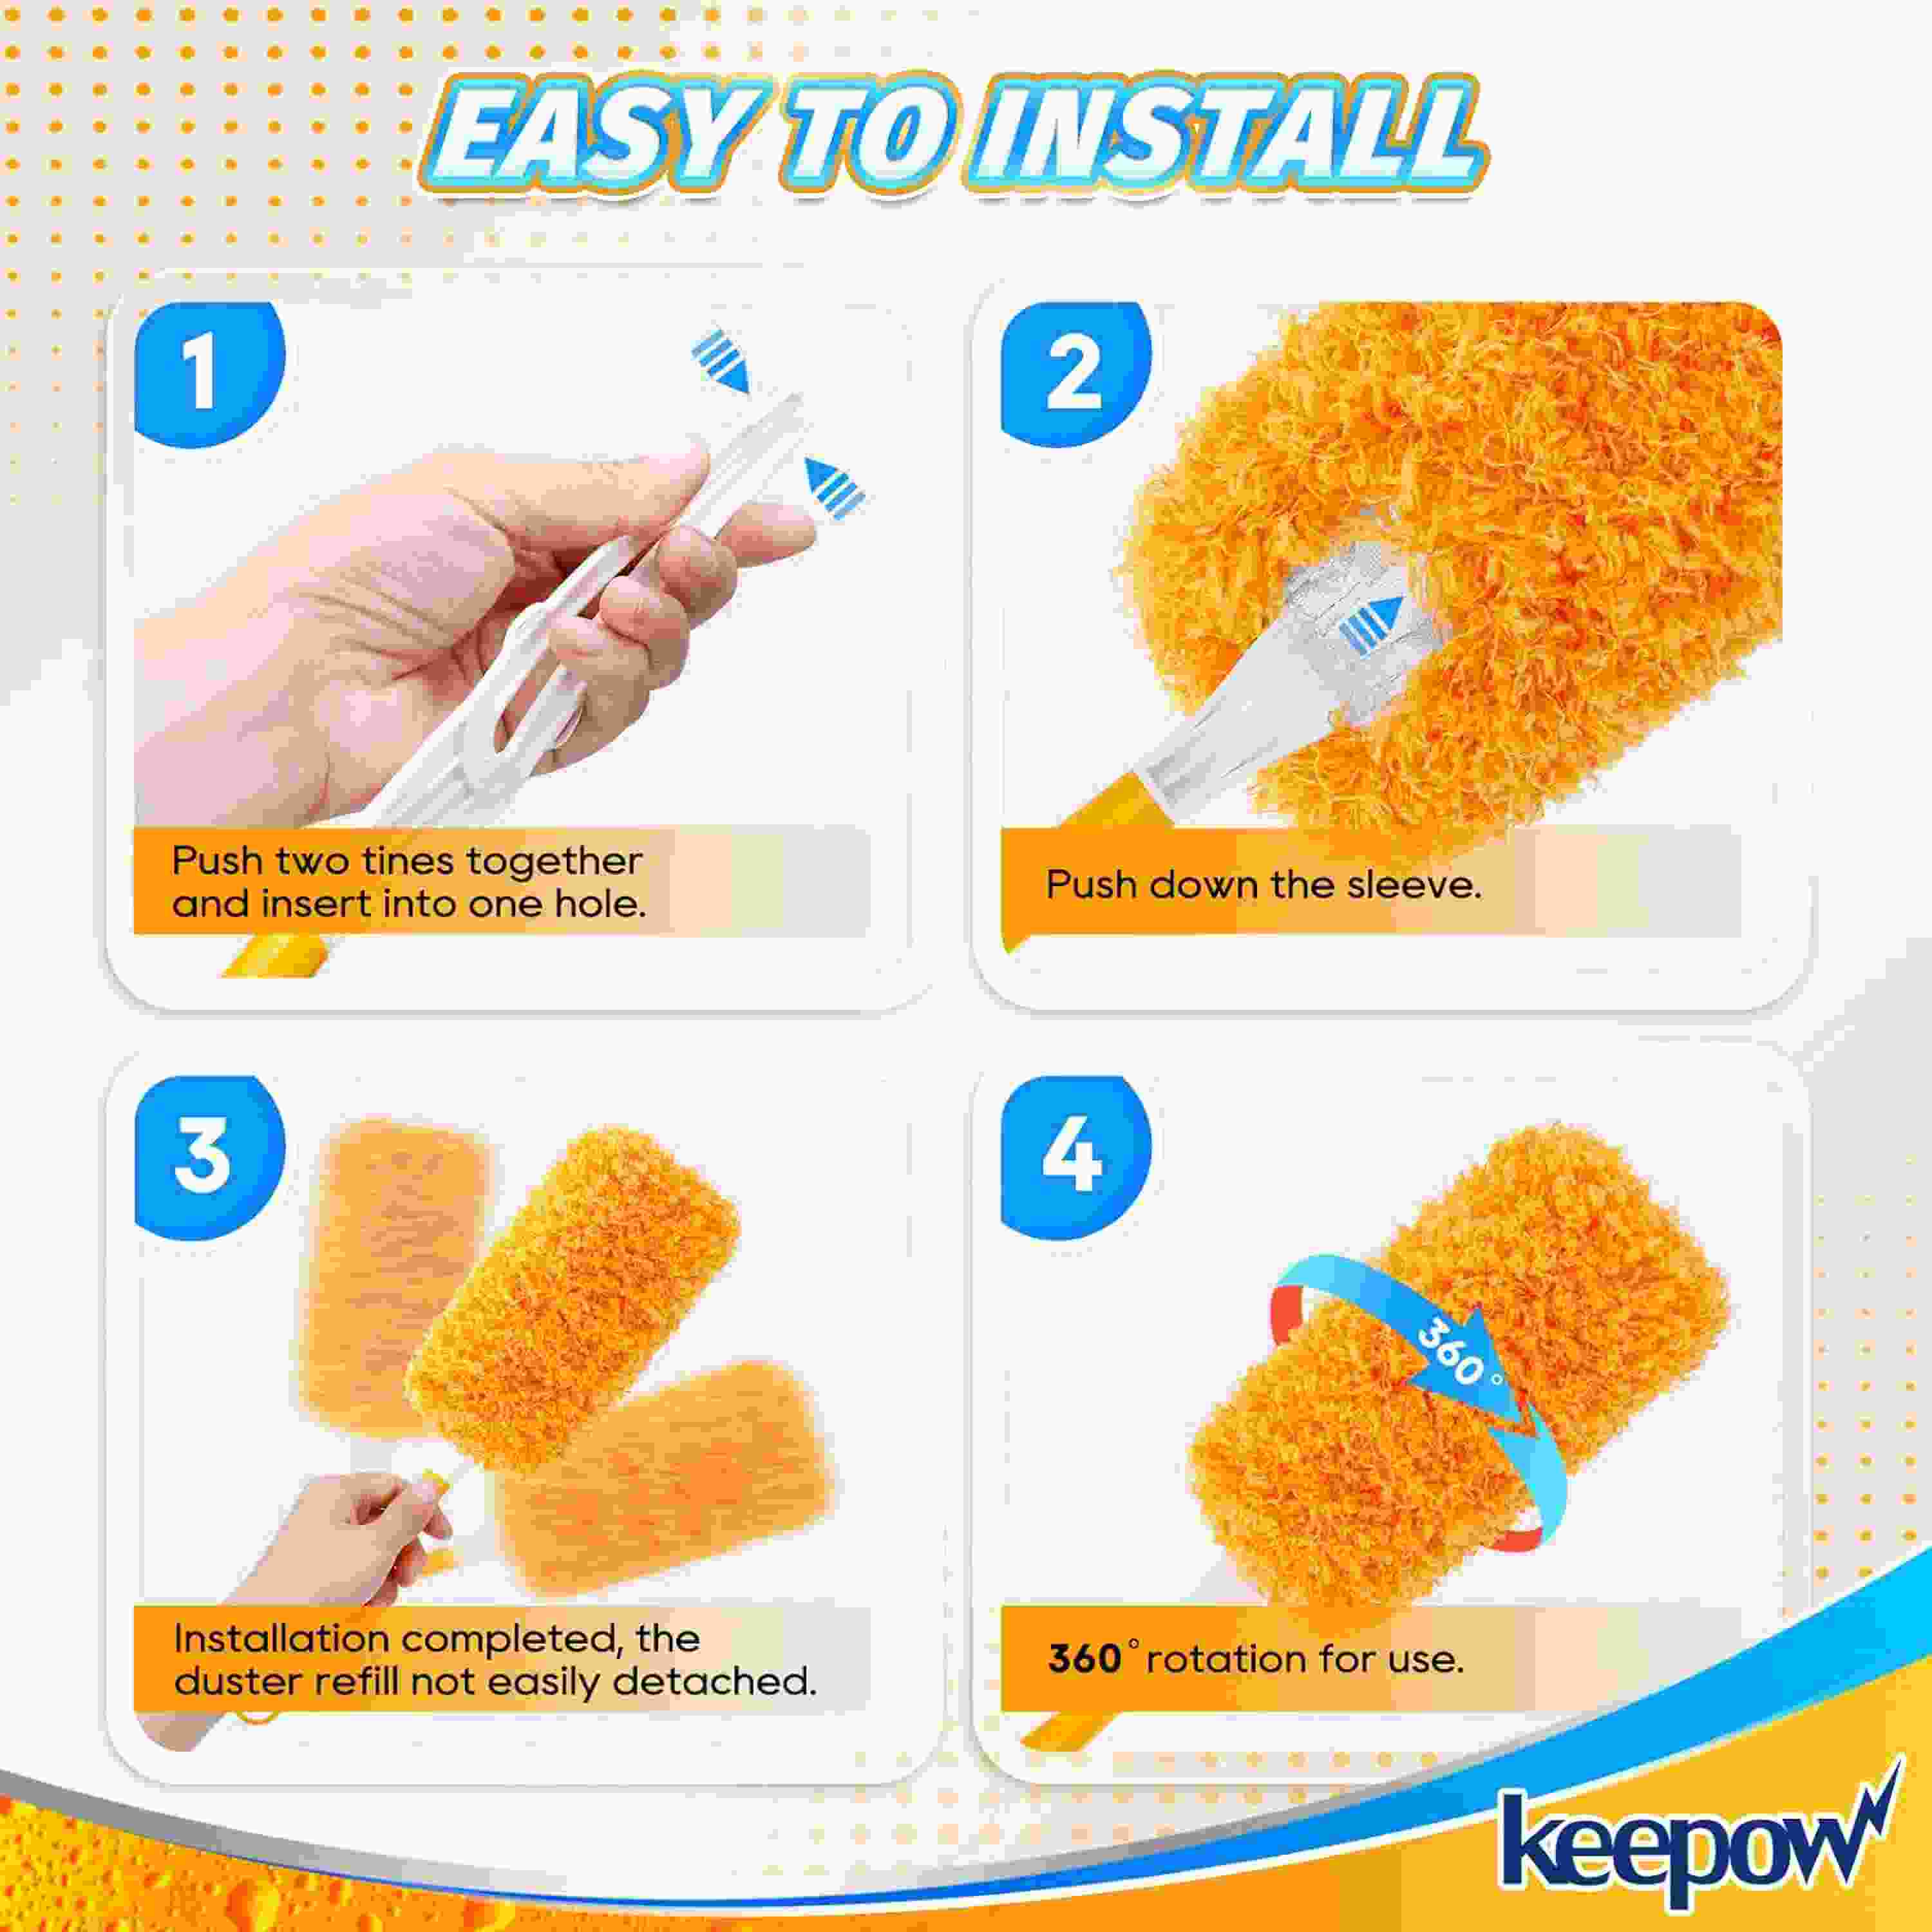 KEEPOW  5704M Reusable Microfiber Duster Refill Compatible with Swiffer Hand Duster, Heavy Duty Duster Refills, 4 Pack (Handle is Not Included)